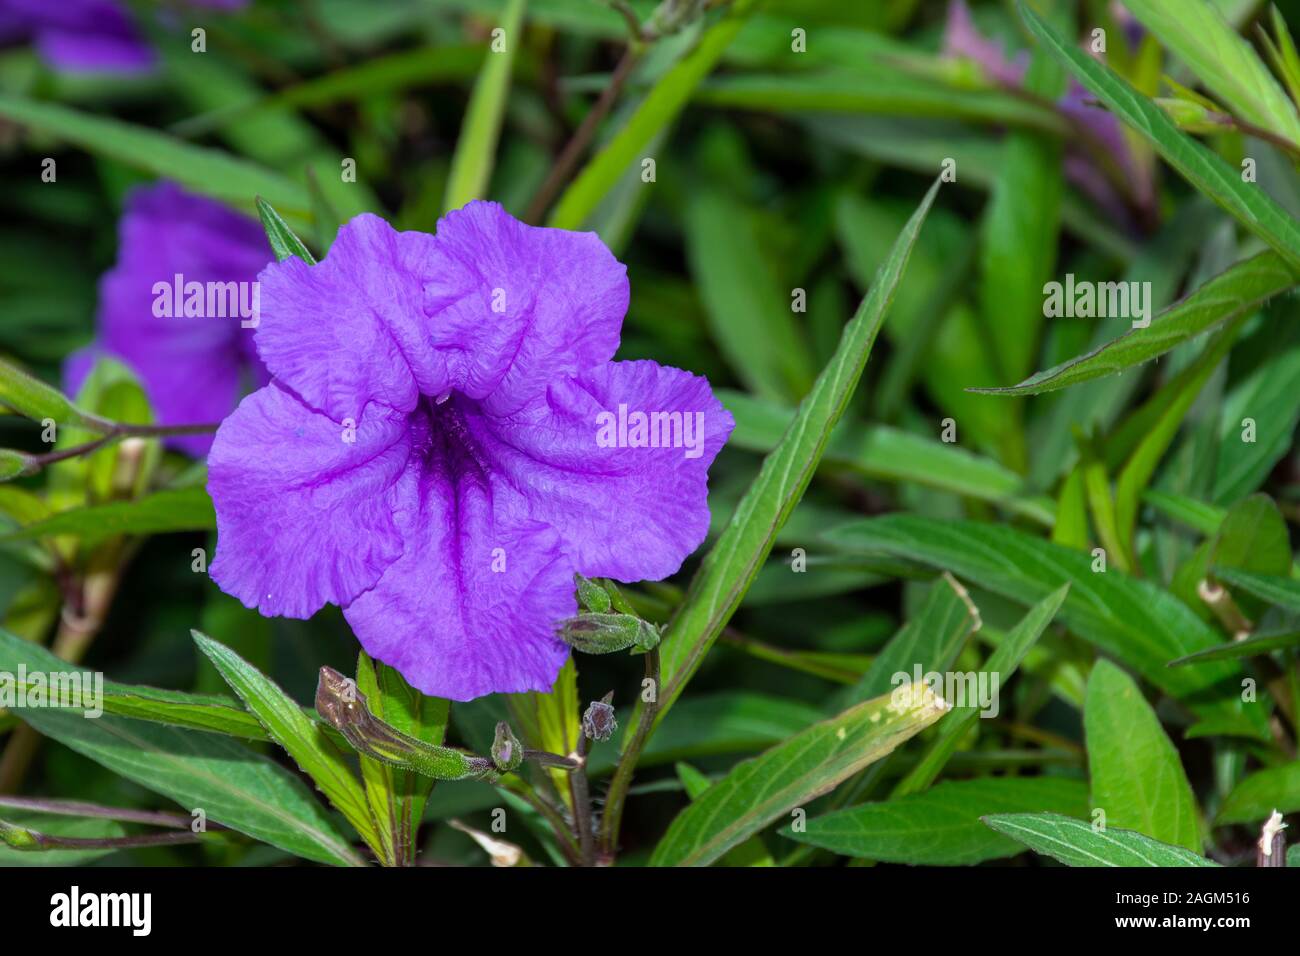 One beautiful close up of a purple wild petunia (fringeleaf wild petunia, hairy petunia, low wild petunia) with green background (copy right). Stock Photo